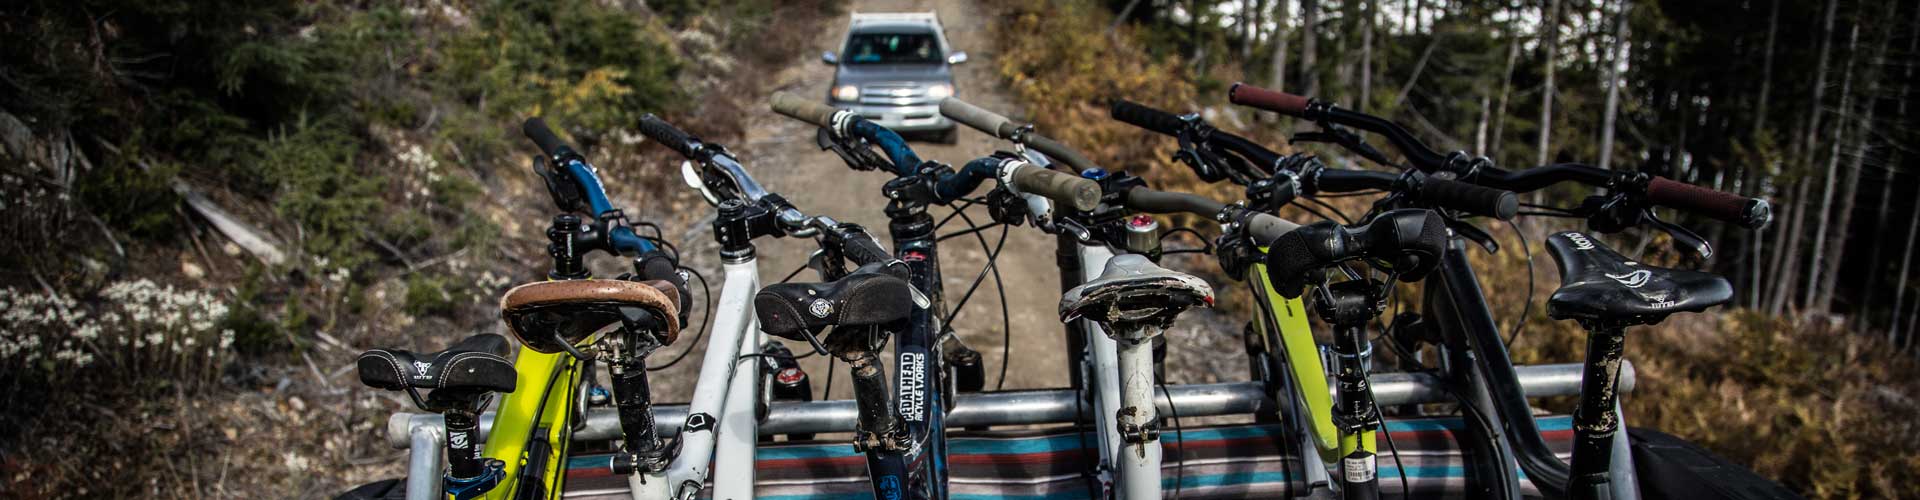 Shuttling loaded with mountain bikes